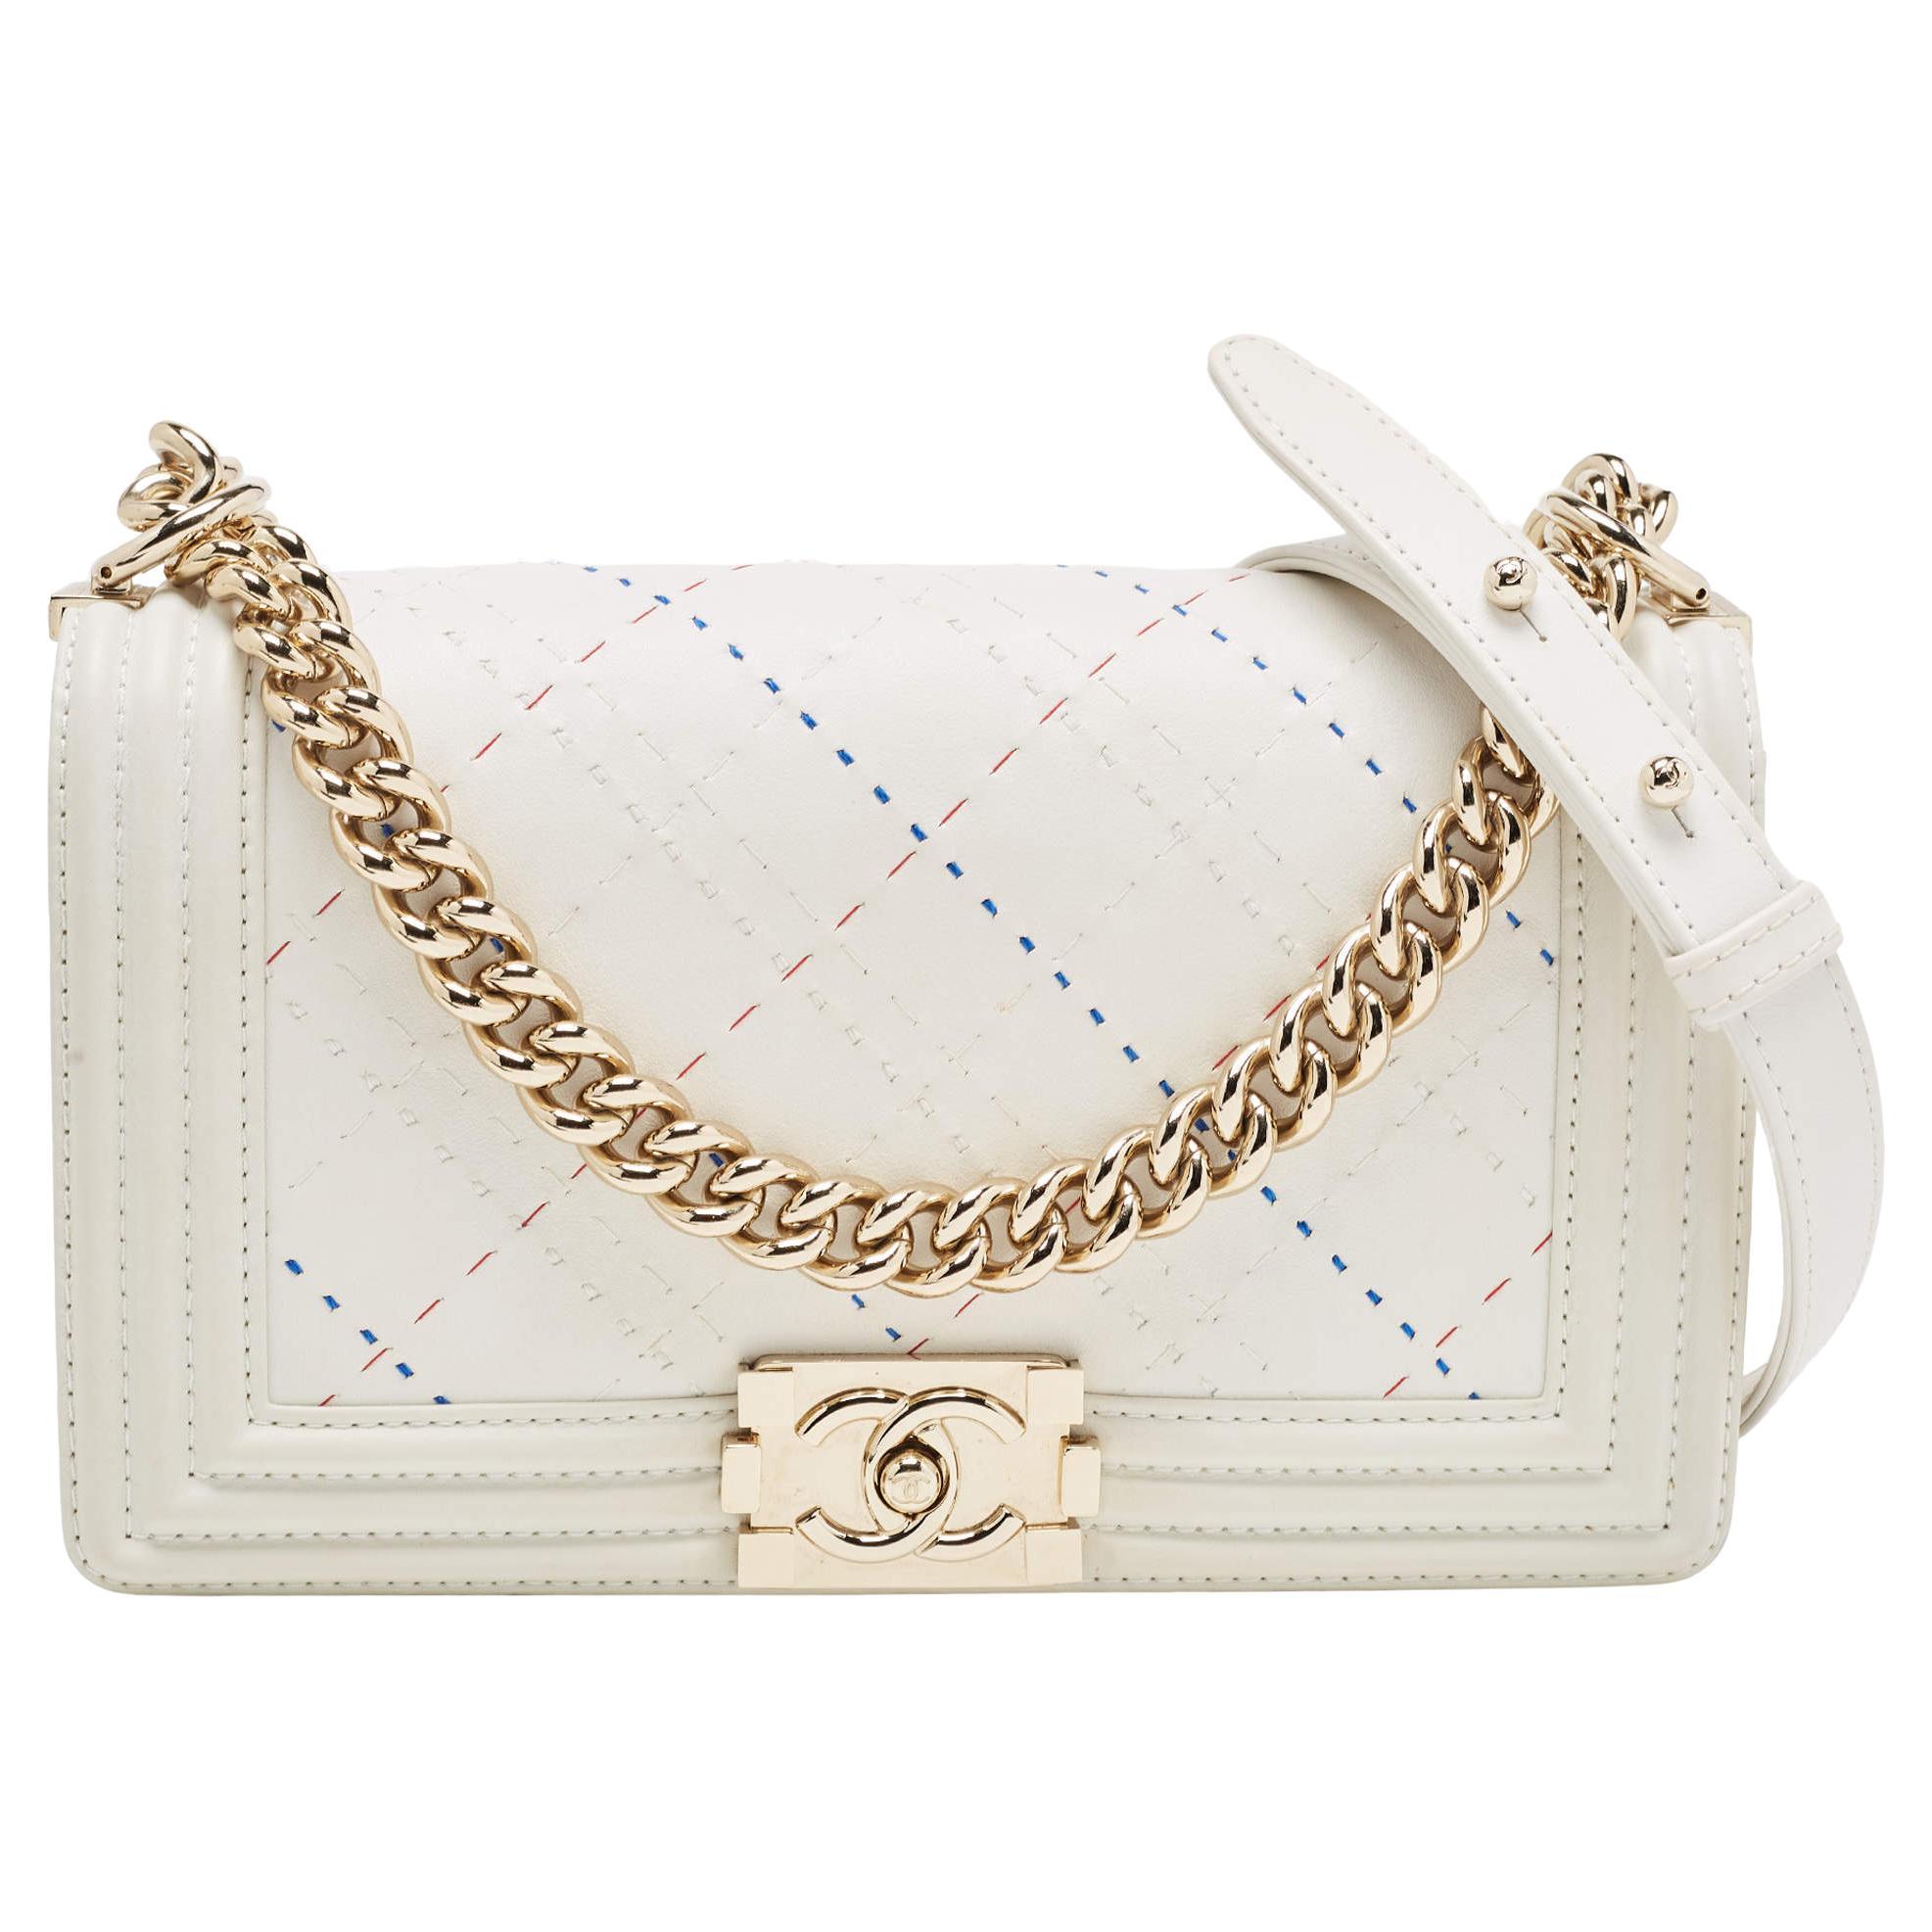 Chanel White Stitch Quilted Leather Medium Boy Flap Bag For Sale